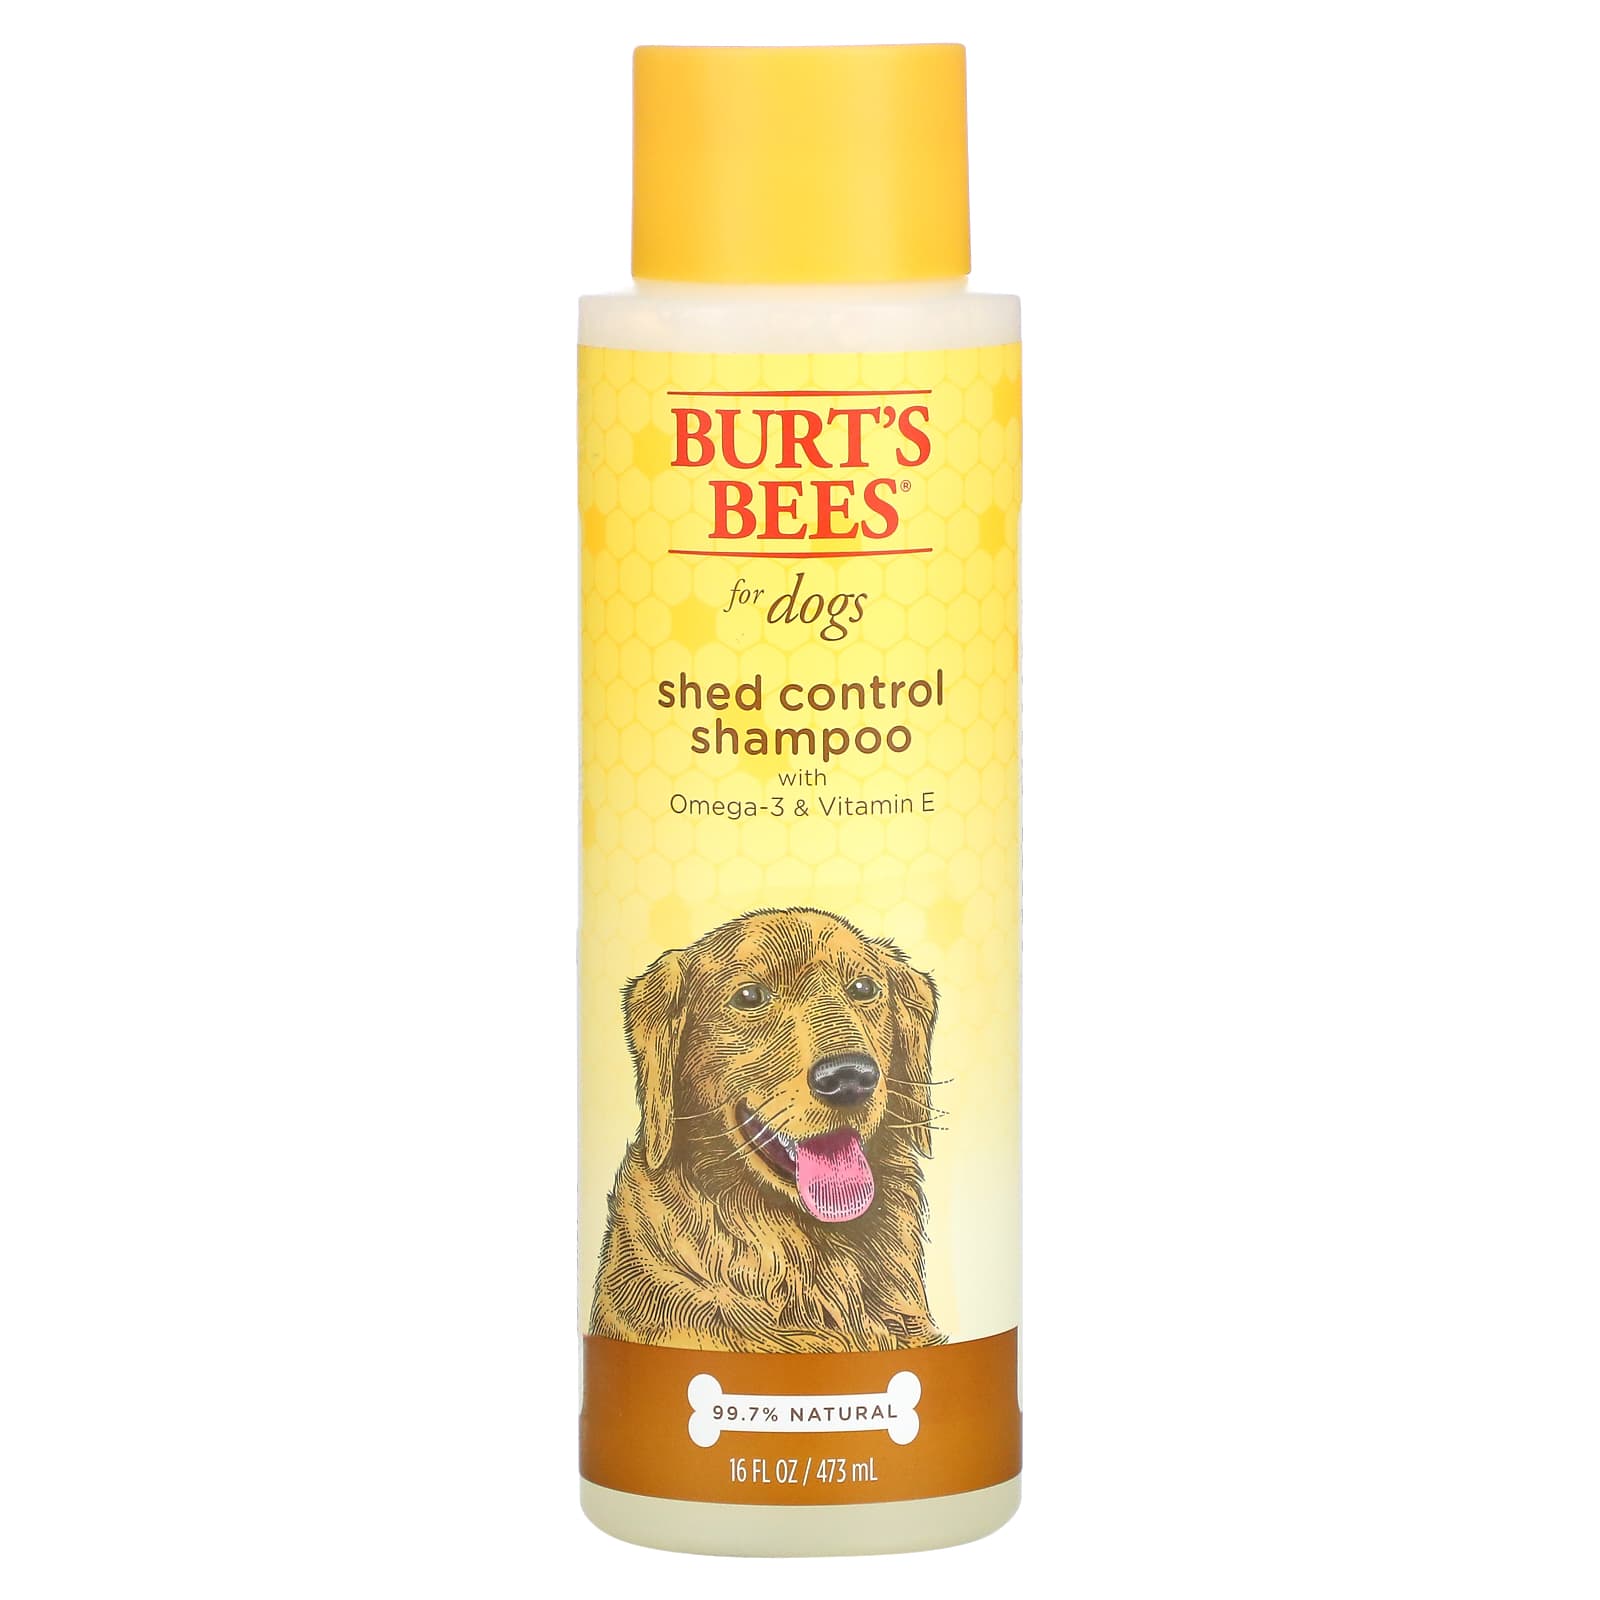 Burt's Bees, Shed Control Shampoo for Dogs with Omega-3 & Vitamin E, 16 ...